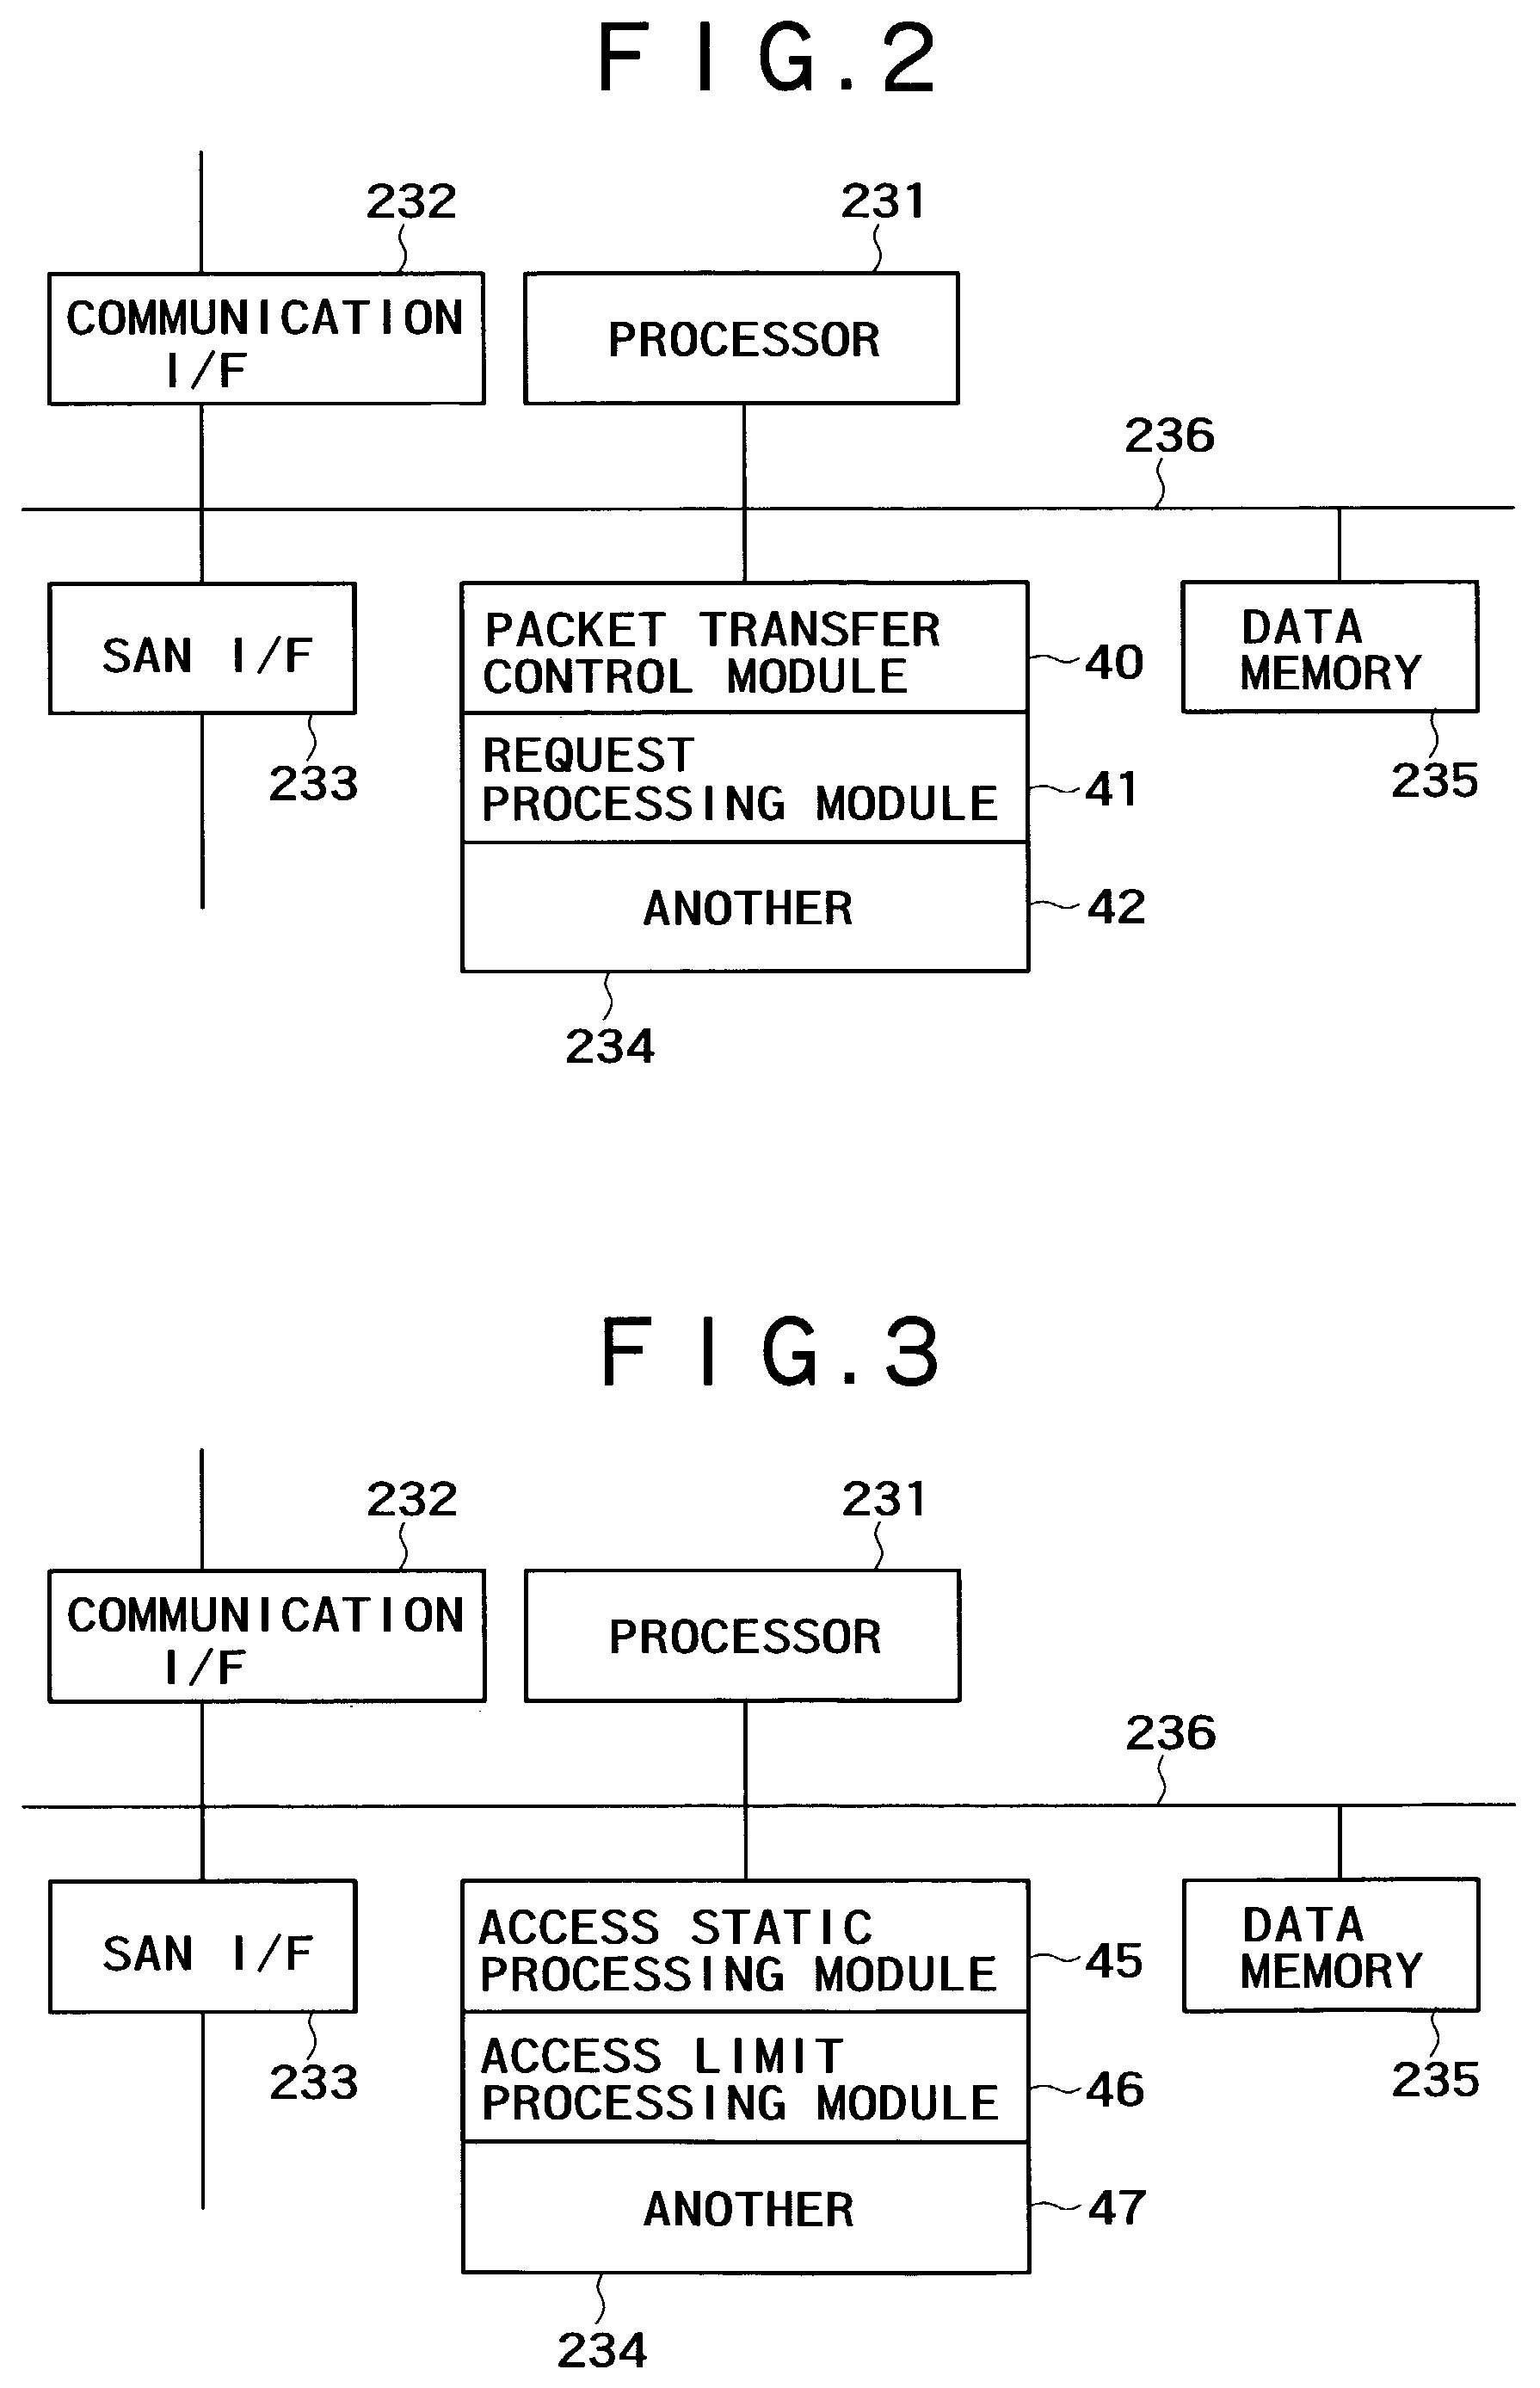 Access relaying apparatus